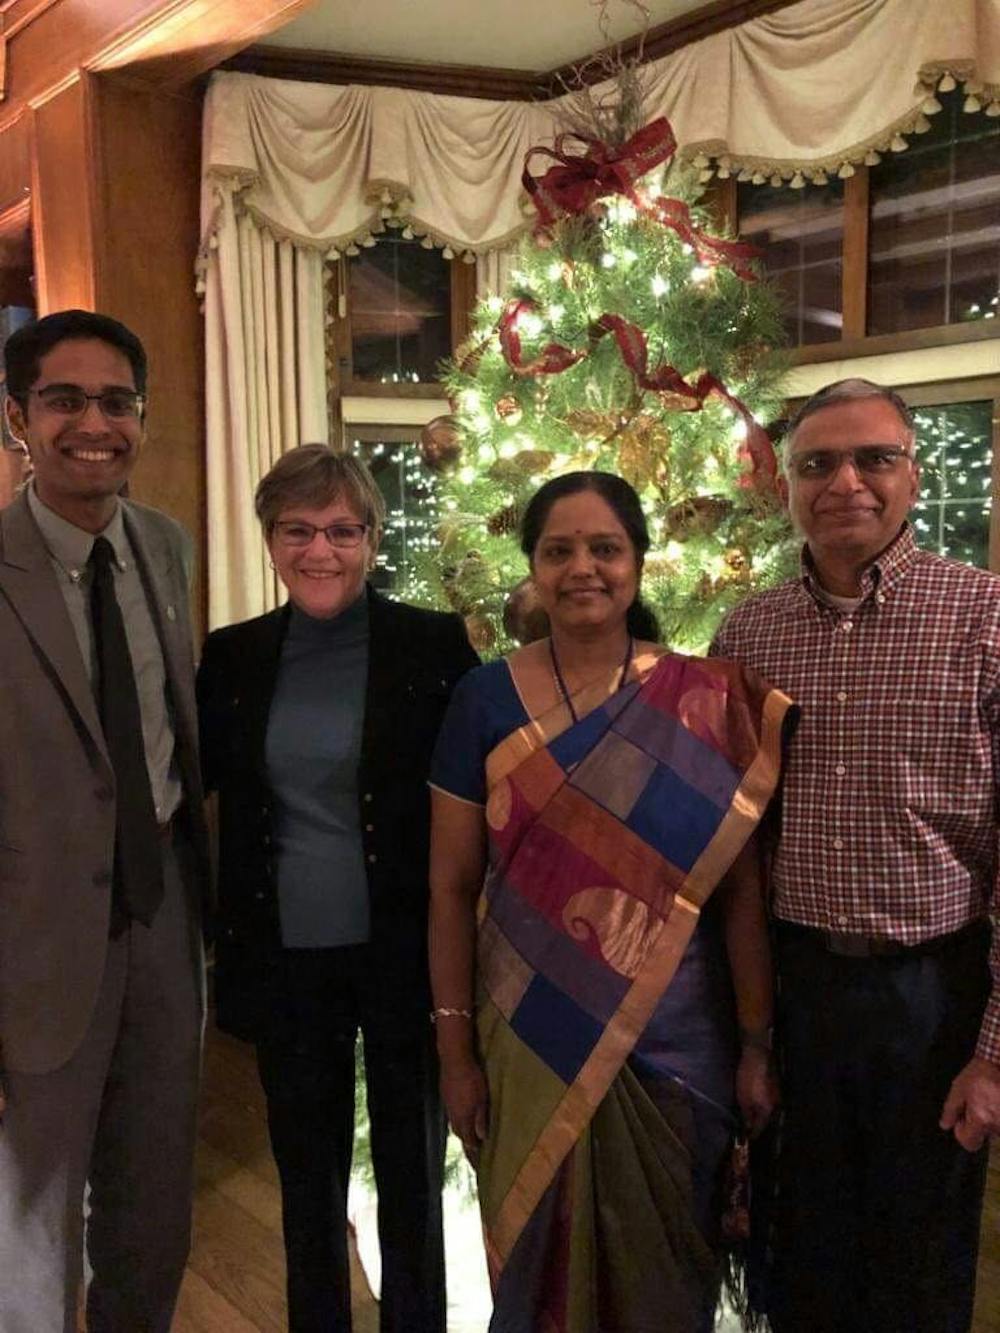 COURTESY OF VIJAY RAMASAMY&nbsp;
Ramasamy is pictured on the left, along with with Laura Kelly, the governor of Kansas, and his parents.&nbsp;